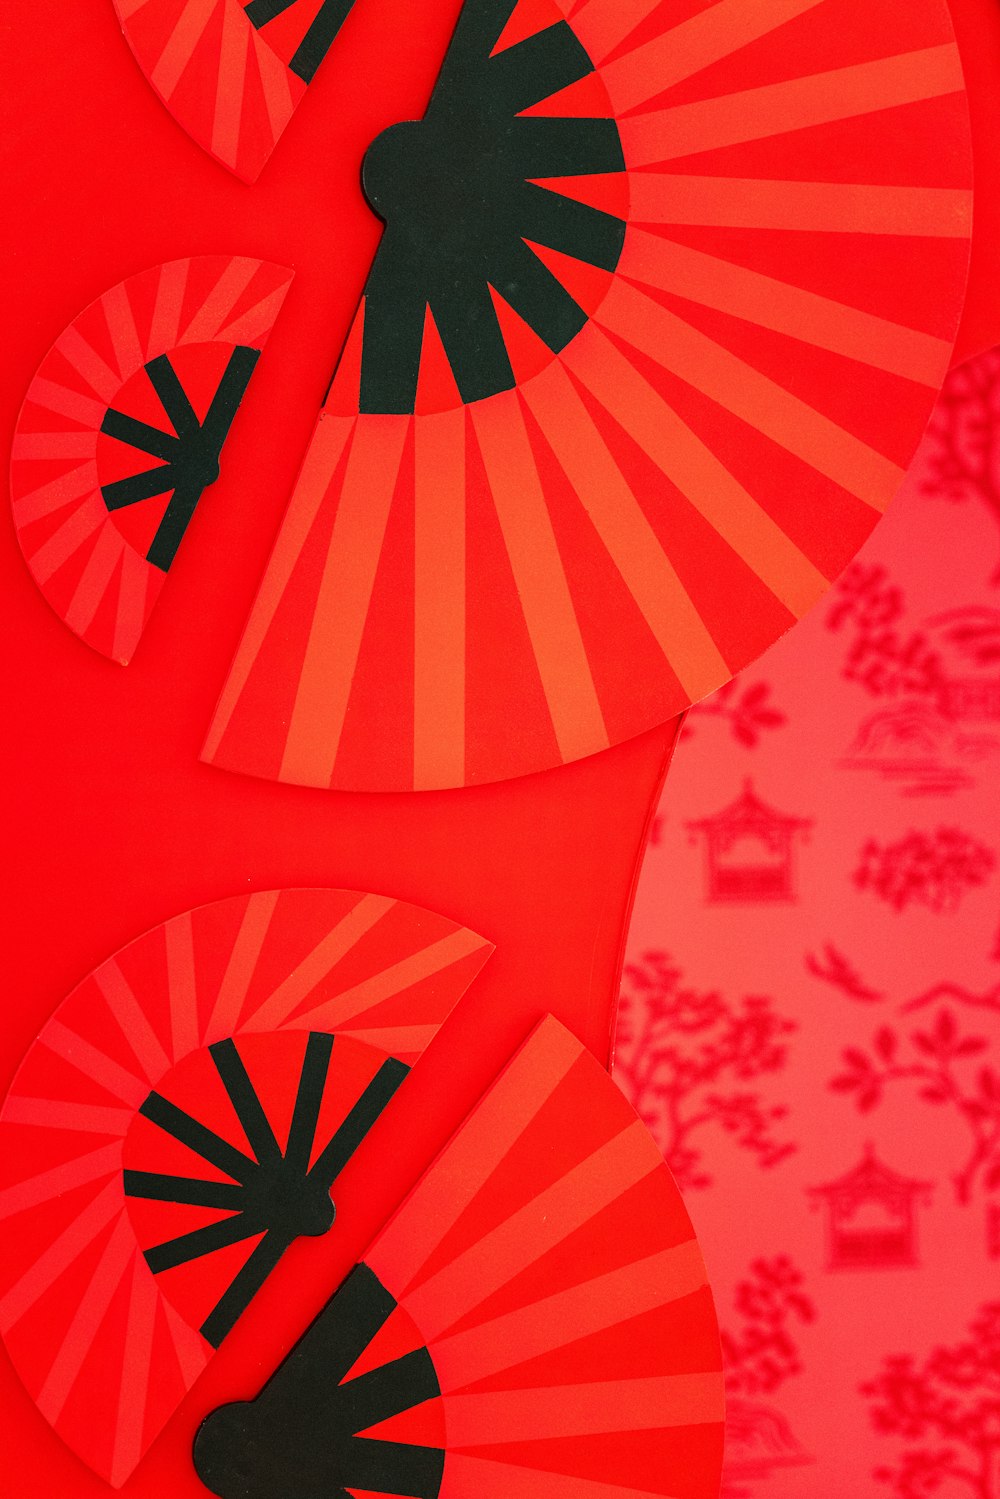 a close up of a red paper with black designs on it